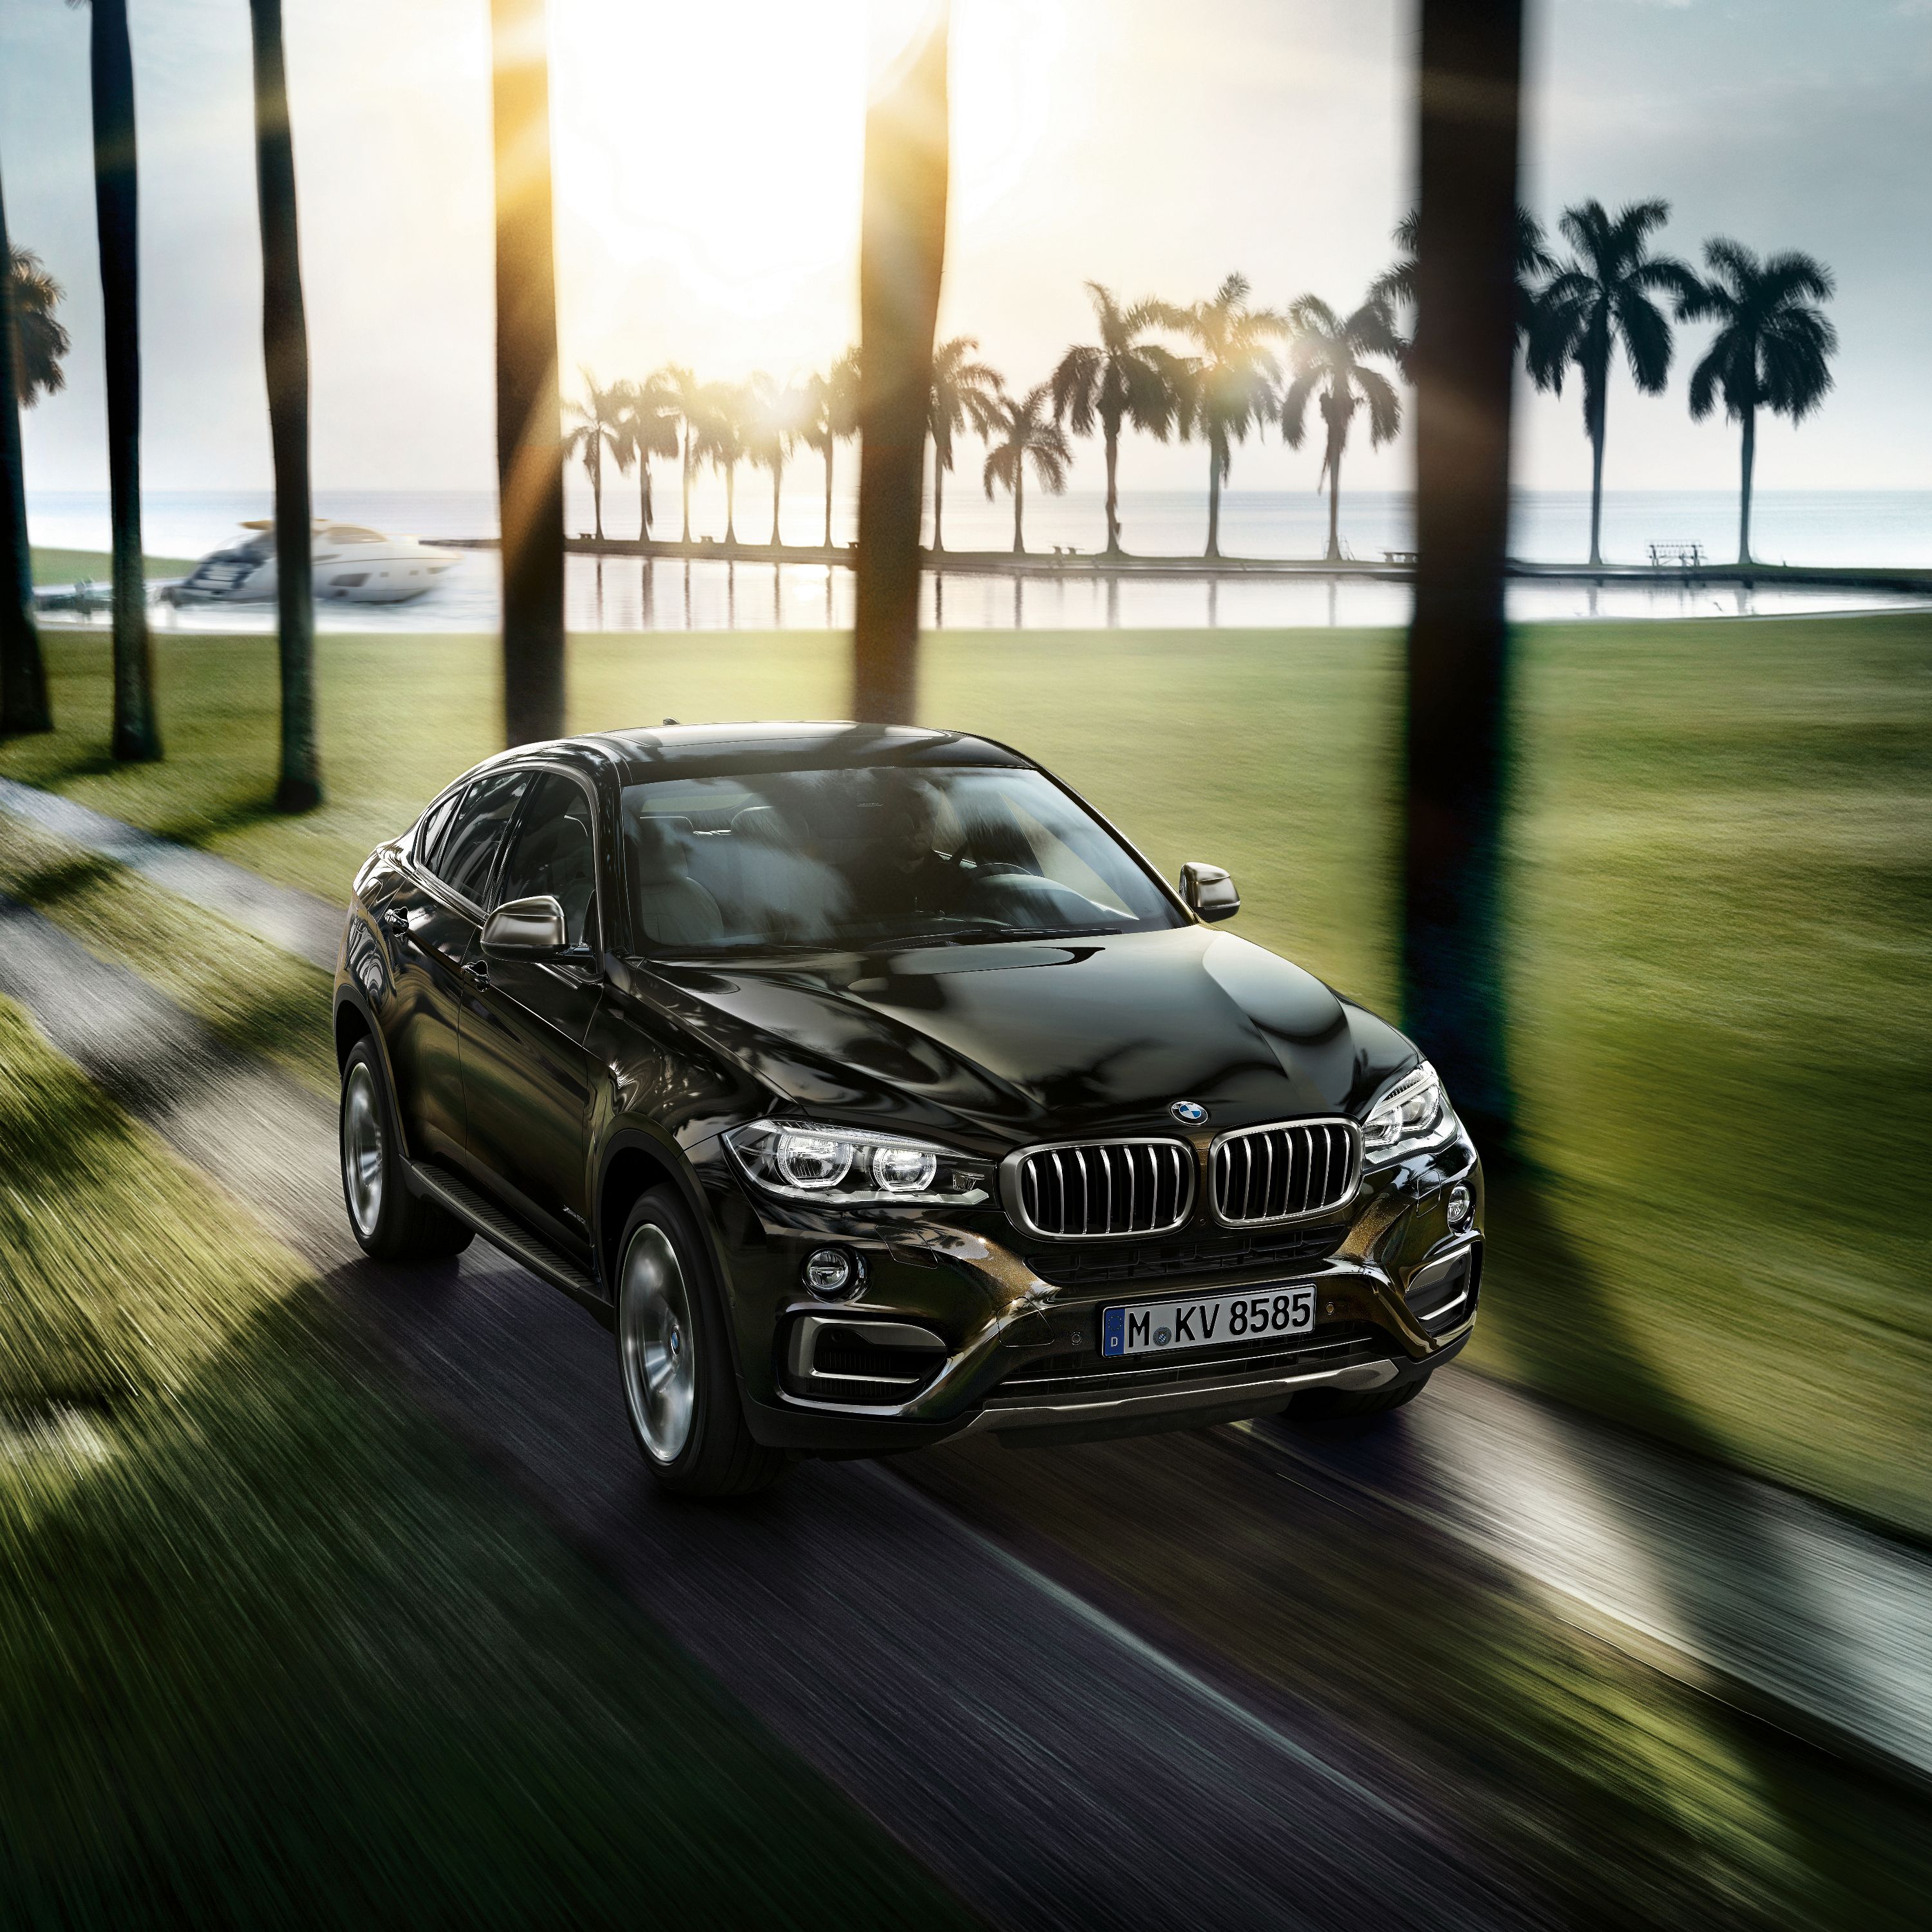 BMW X6 F16 SUV on a dirt road flanked with palm trees and a Caribbean background